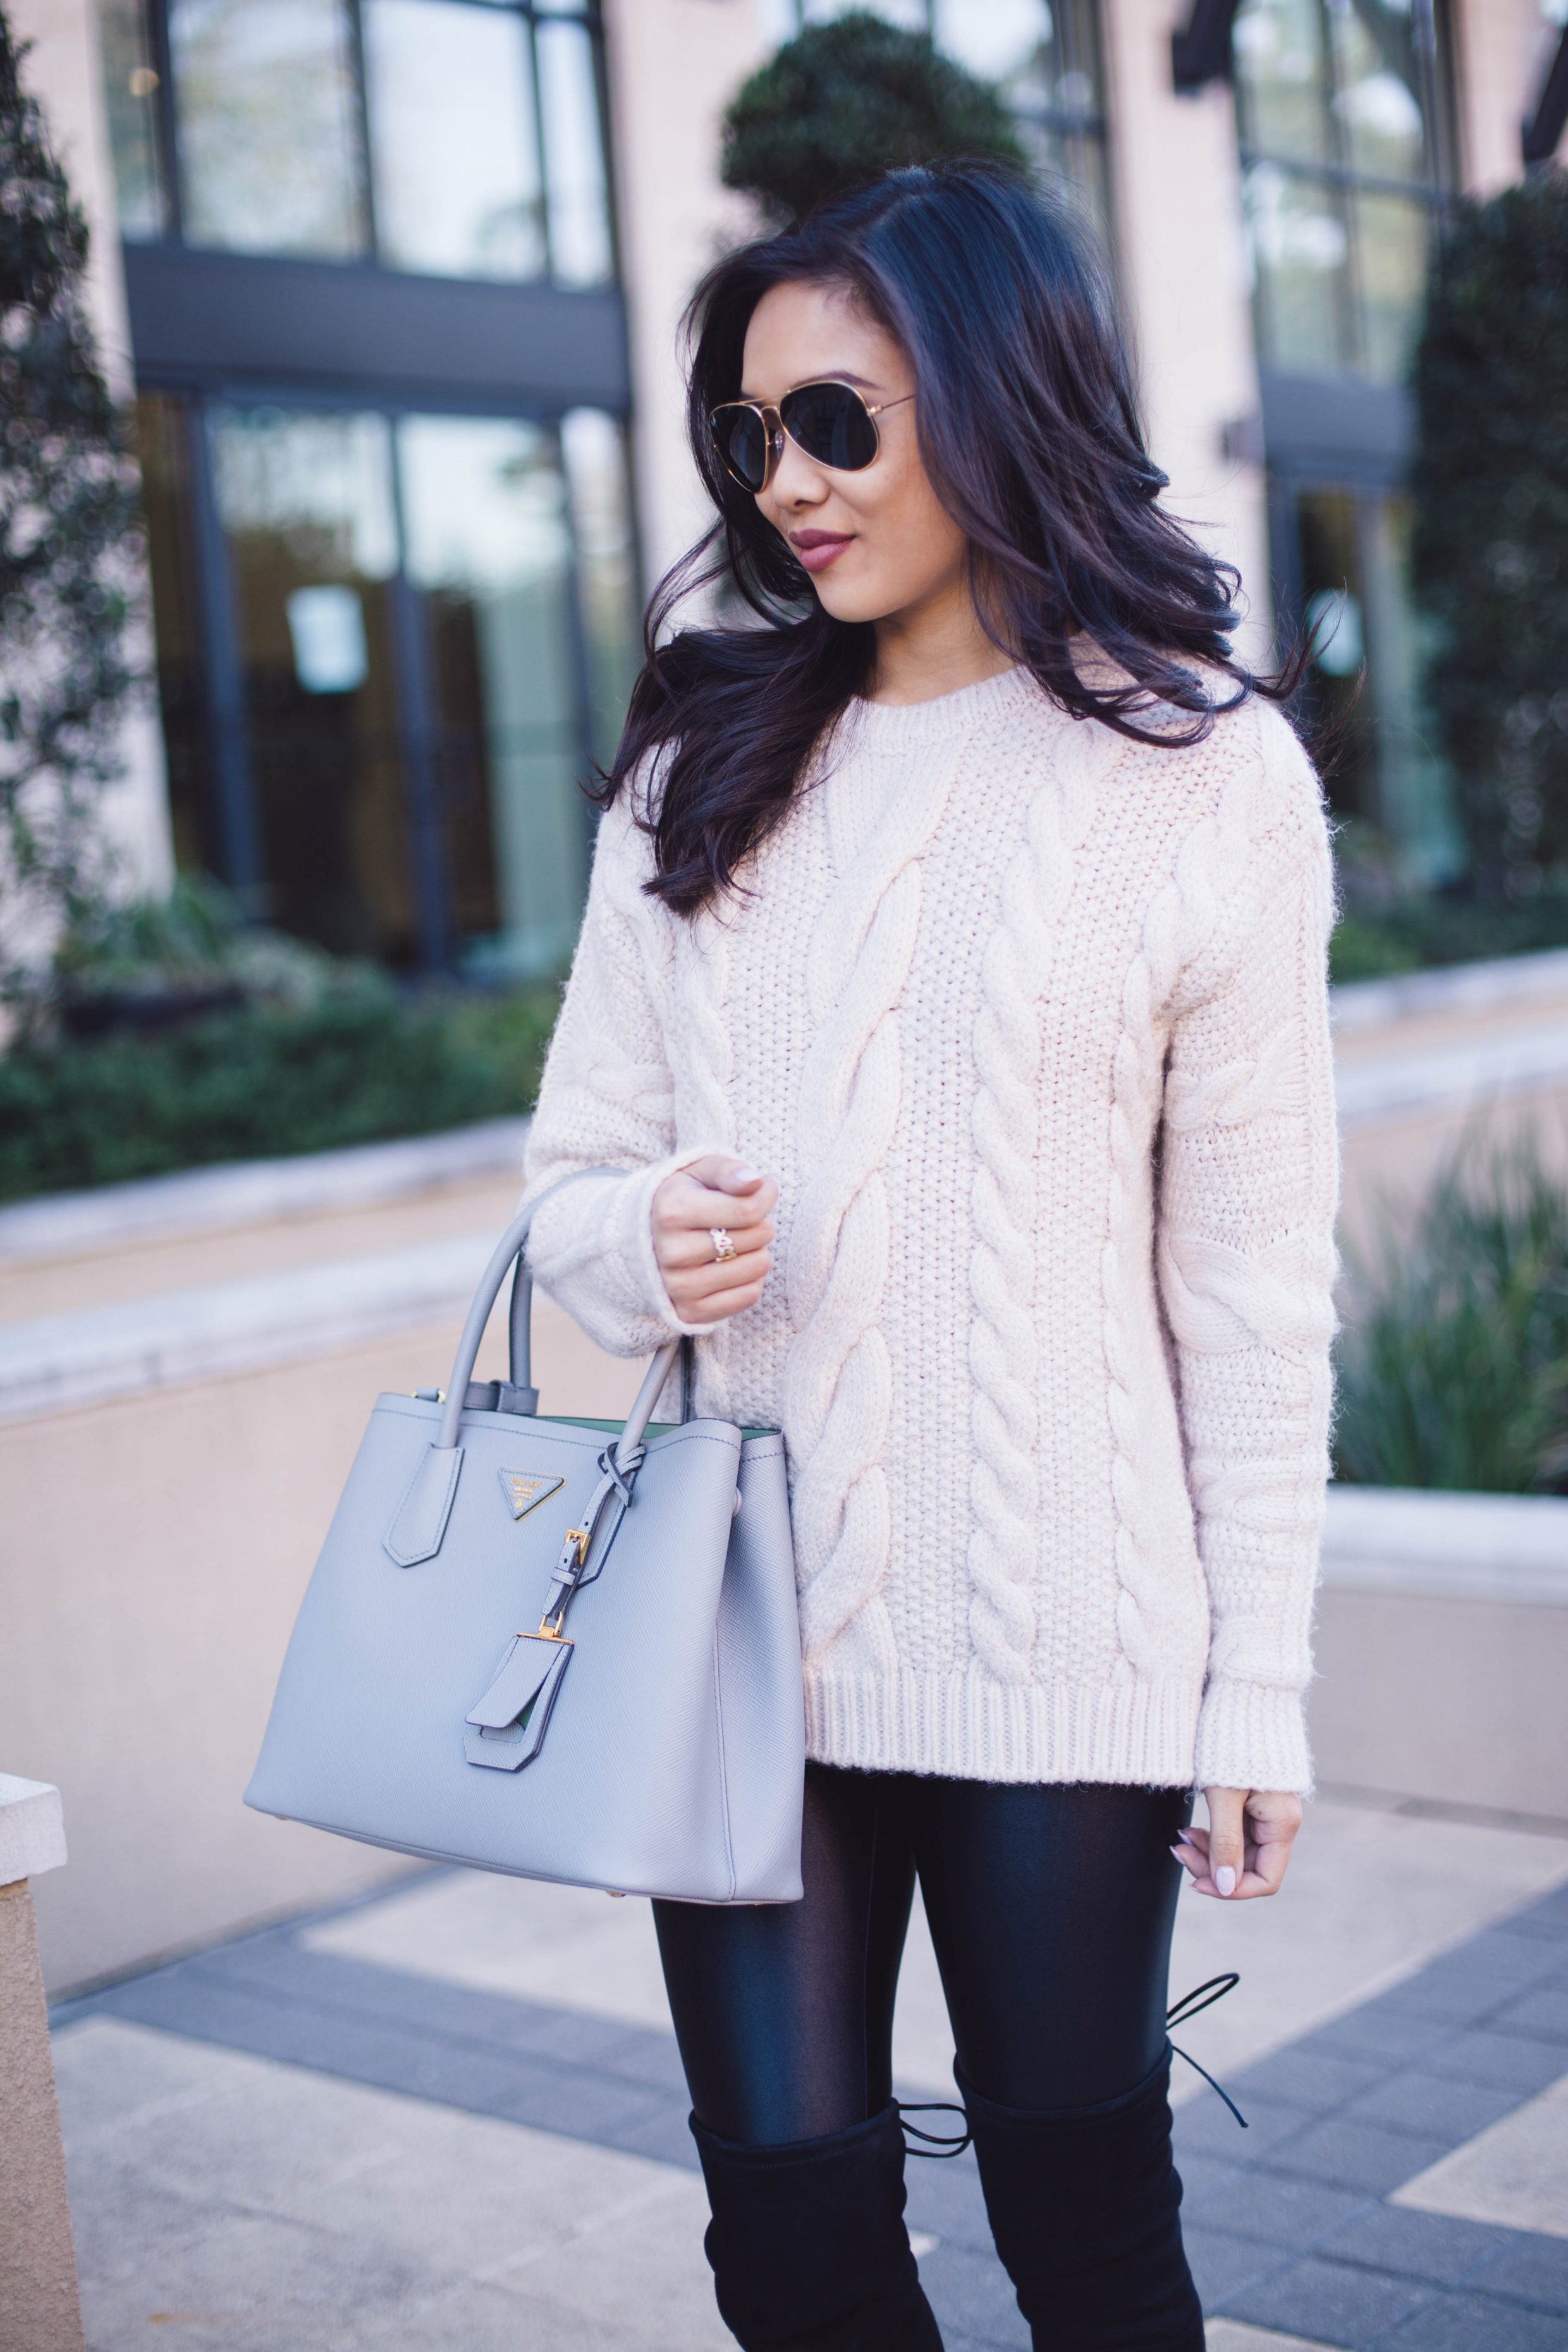 Casual cable sweater with liquid leggings